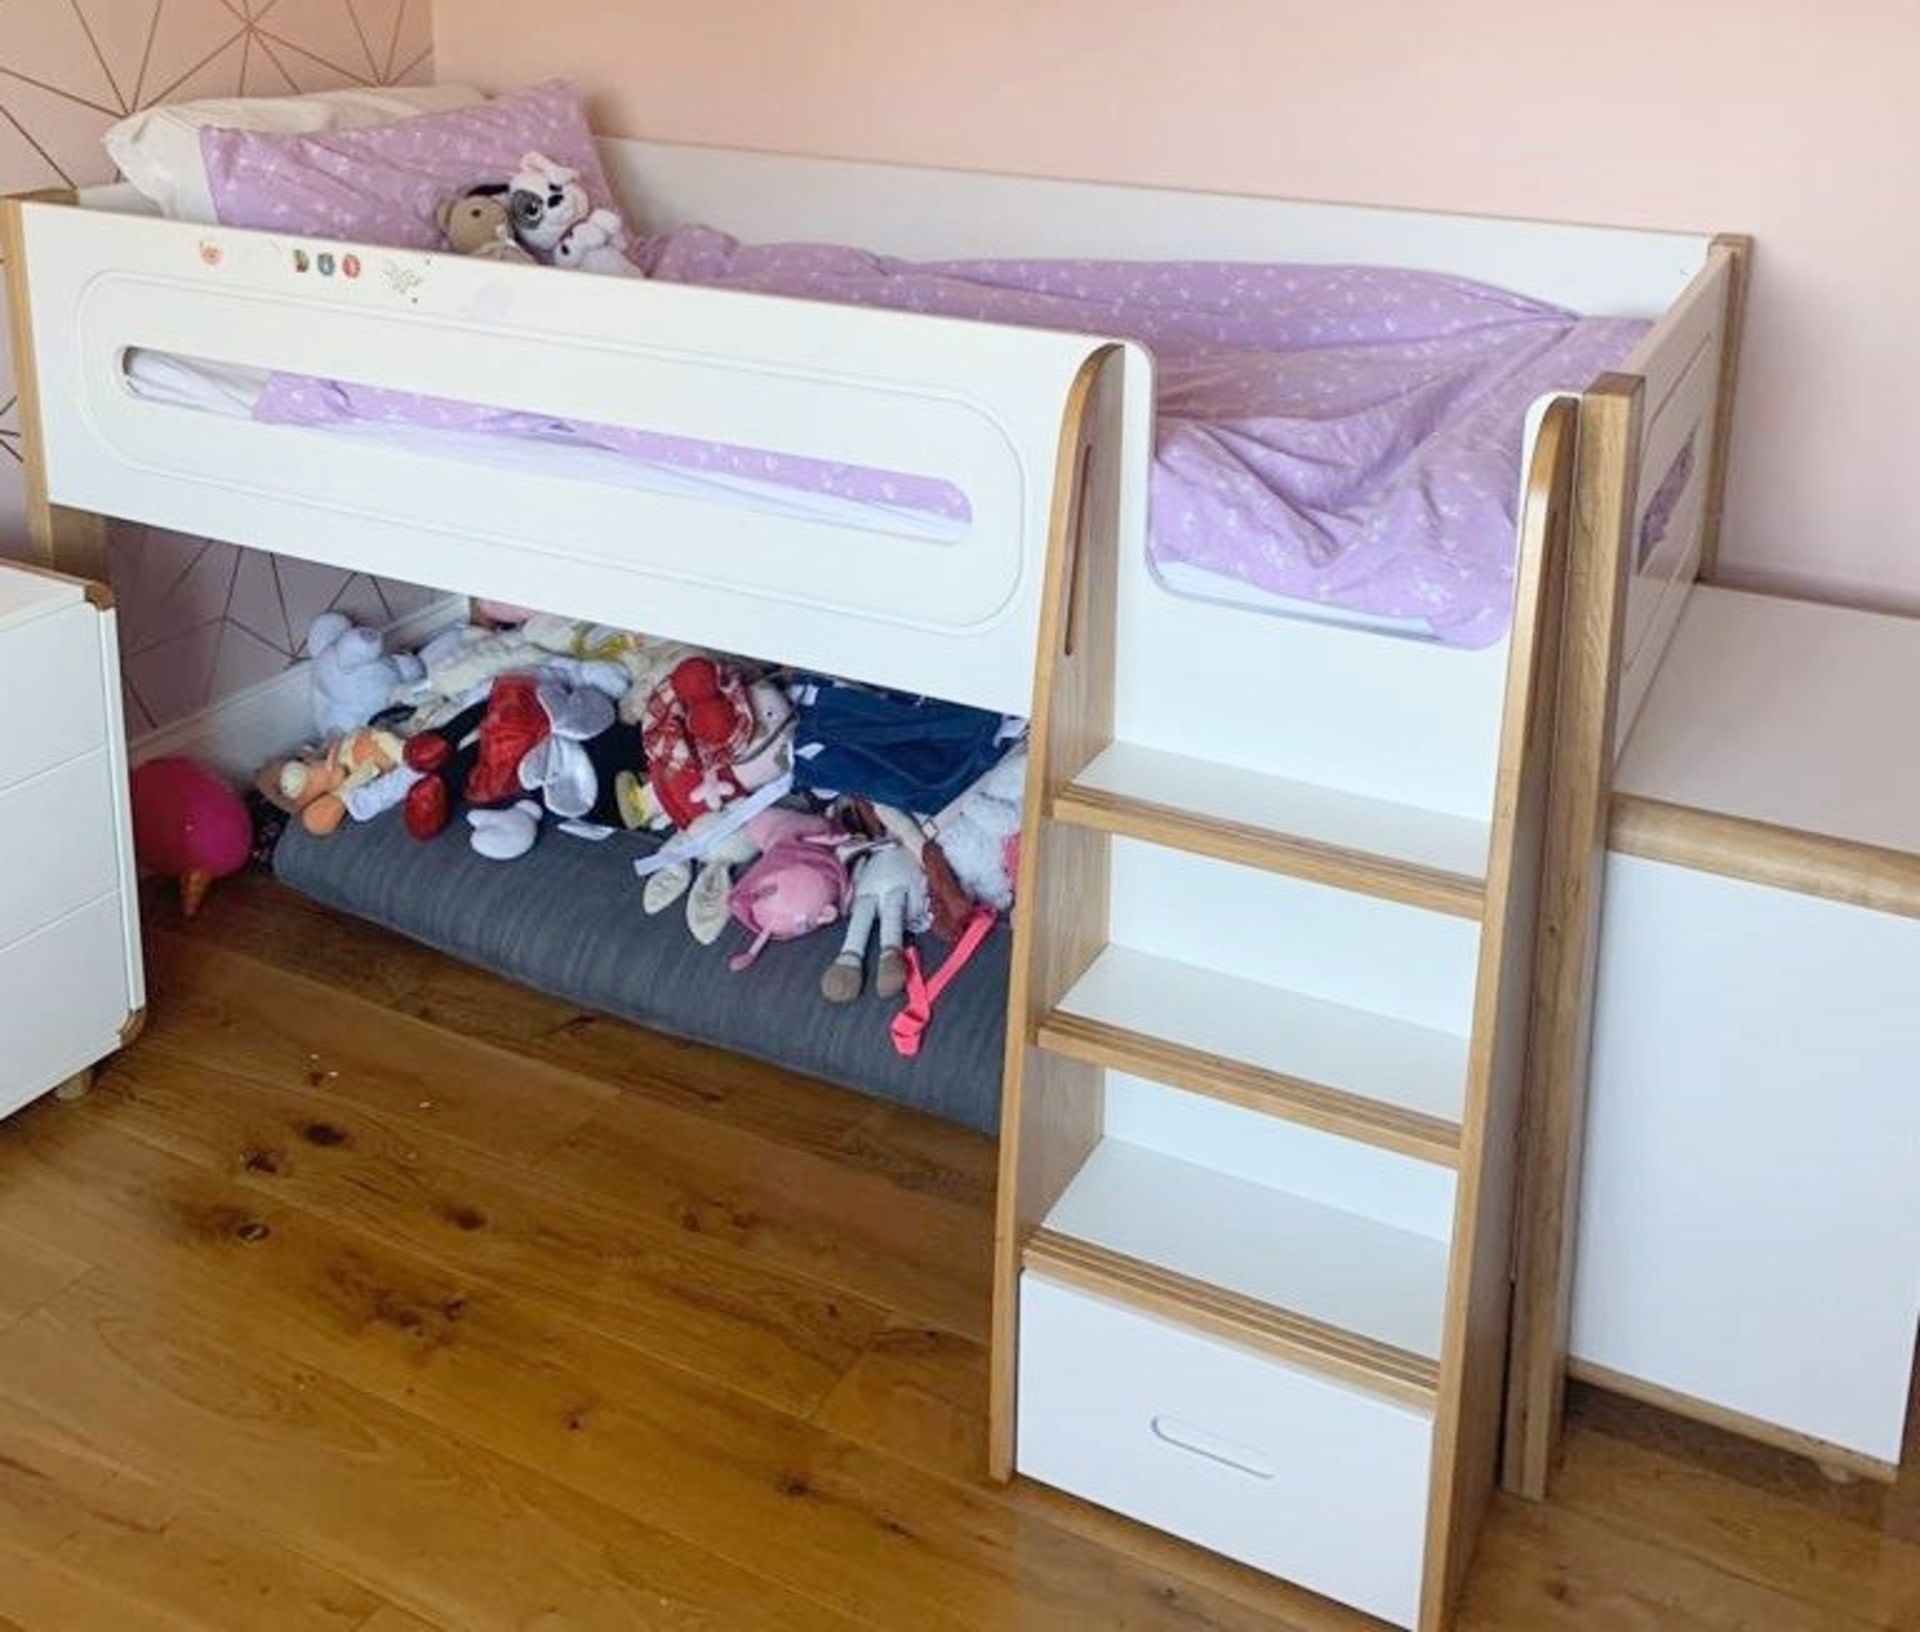 1 x 4-Piece STOMPA 'Curve' Children's Premium Bedroom Set - Preowned - Location: Wilmslow, Cheshire - Image 8 of 9